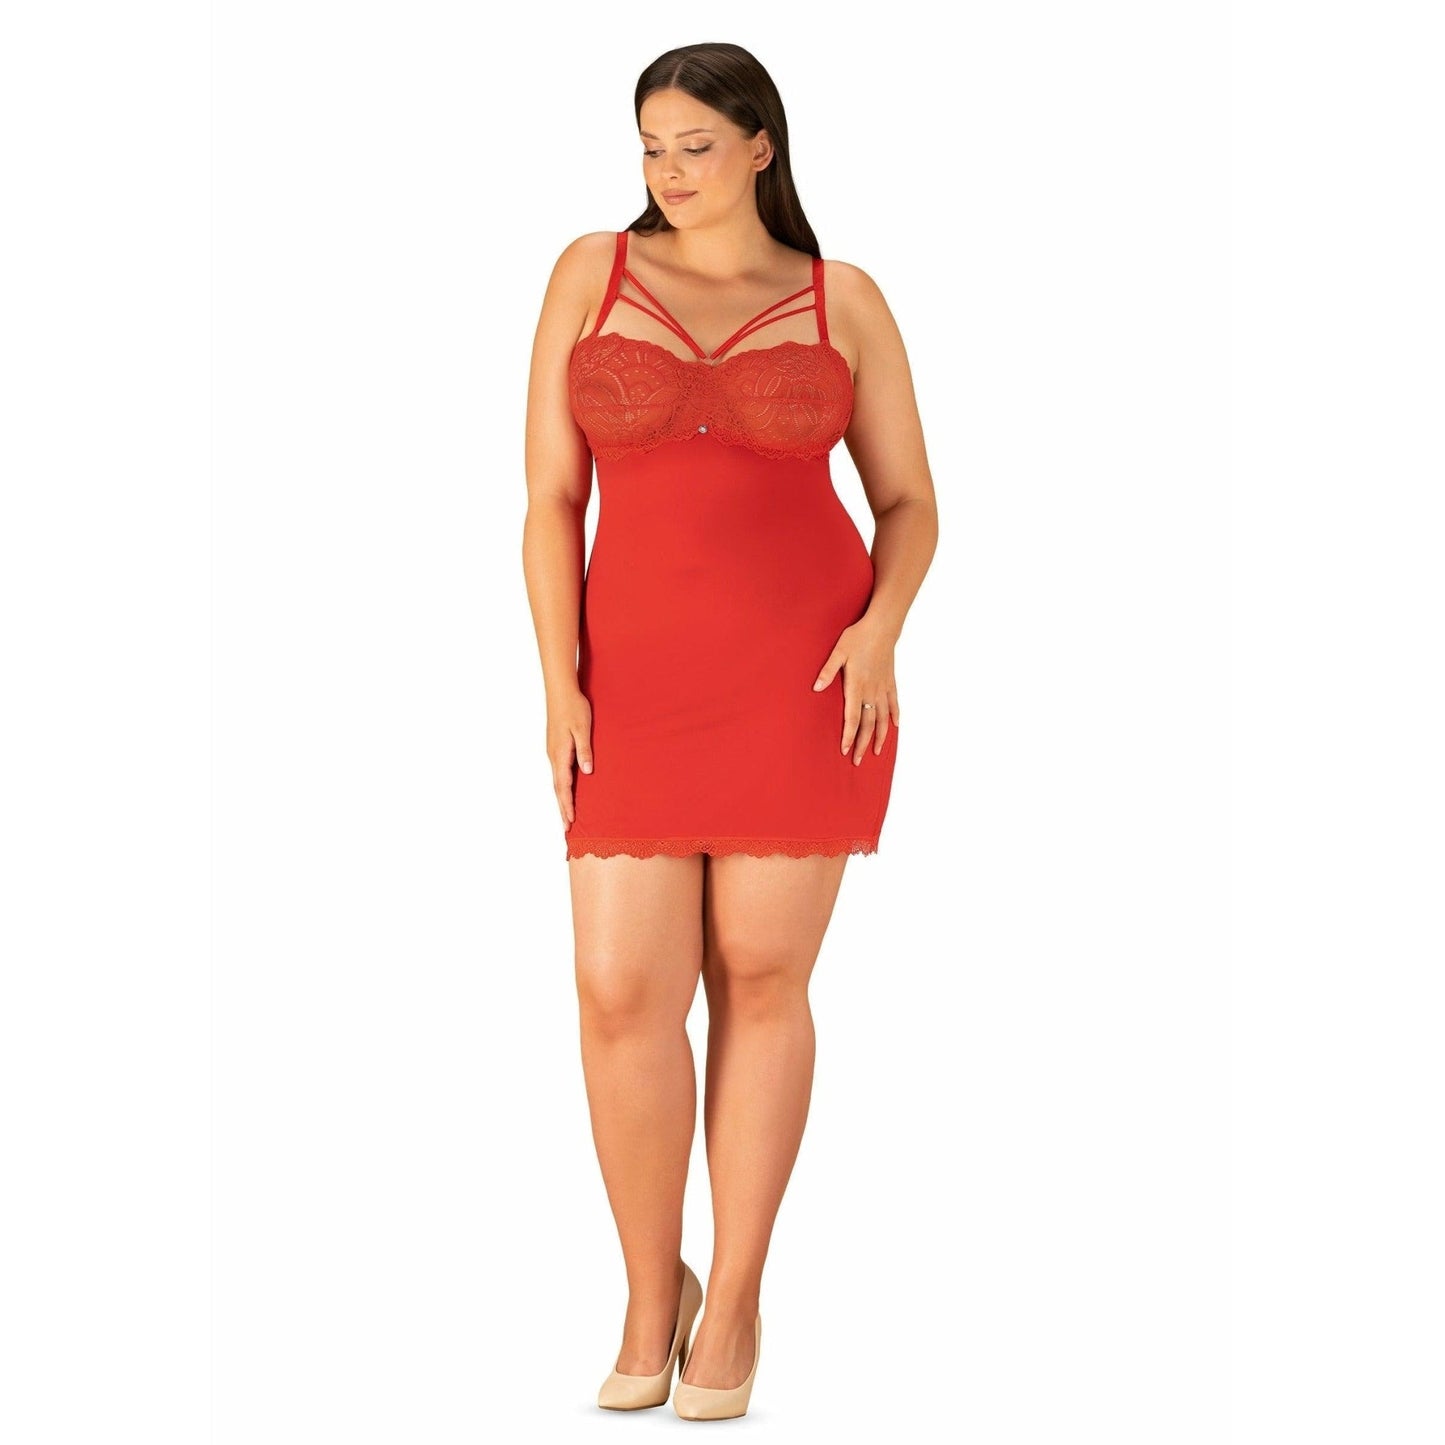 Obsessive Loventy Red Chemise & Thong - Plus Size